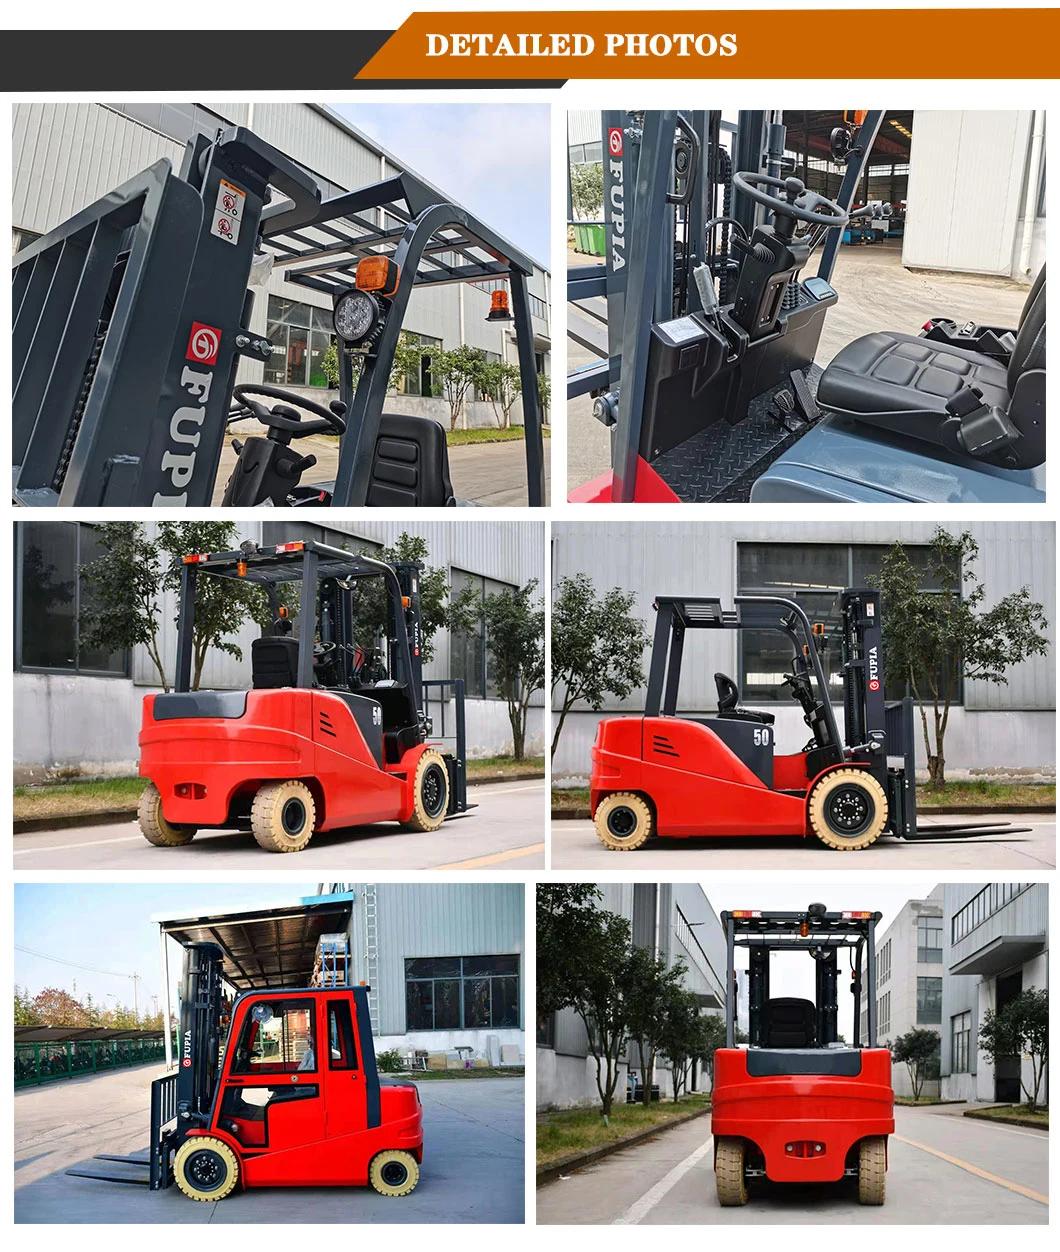 Warehouse Machine Lifter Toyota Forklift Technology 5.0 Ton Electric Forklifts